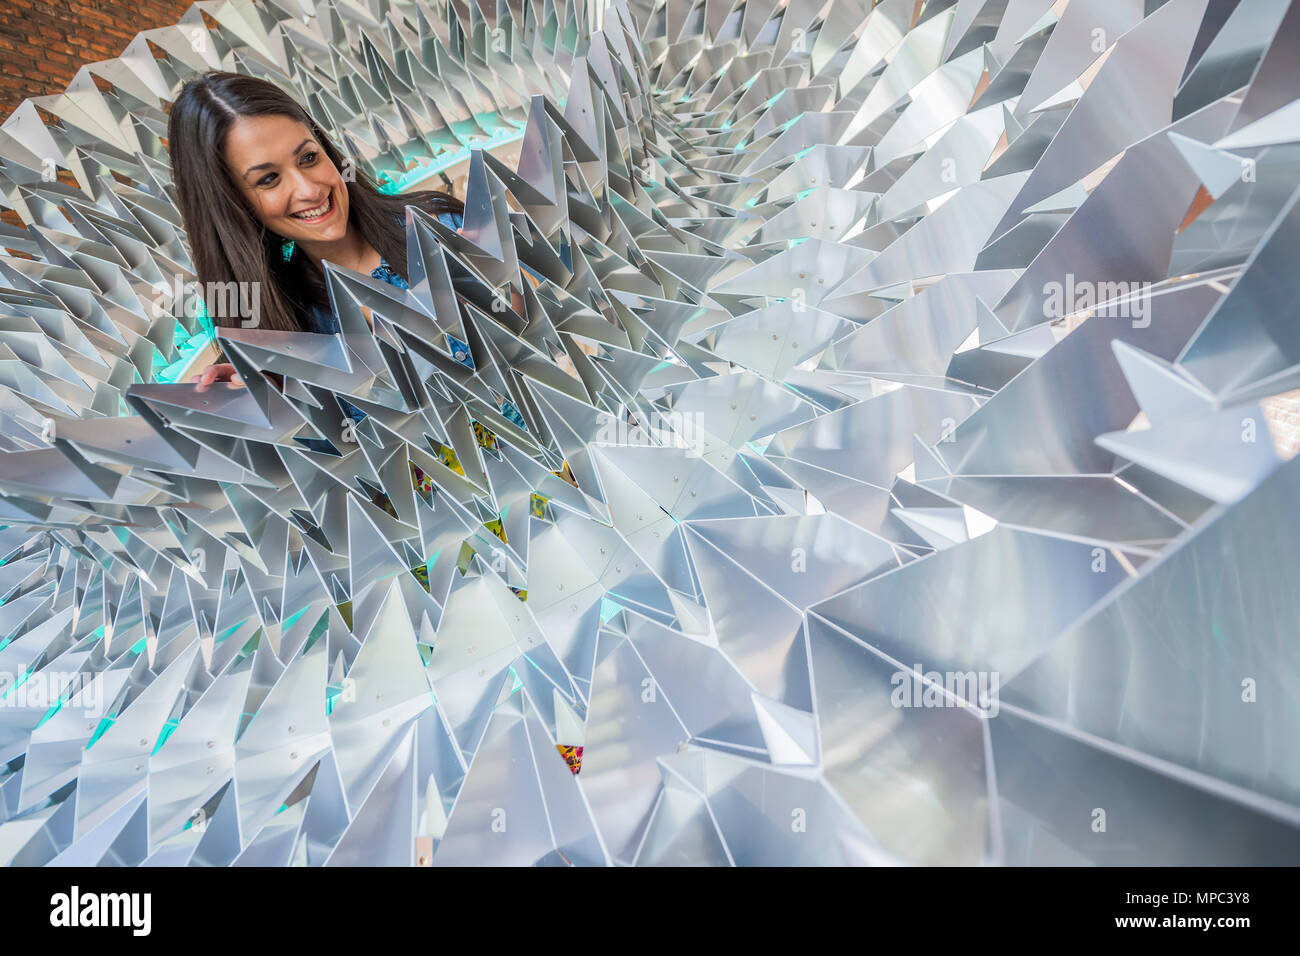 London, UK. 22nd May, 2018. Design bloggers tour the installations. Royal Approval the biggest Elizabethan ruff ever created - made from sheet aluminium folded in an origami way, it has been created by Kinetech Design in collaboration with Amari Interiors and Timberfusion. It is in St John's Gate which saw the first performances of some of Shakespeare's most famous works - Outdoor installations for Clerkenwell Design Week, which starts today. Credit: Guy Bell/Alamy Live News Stock Photo